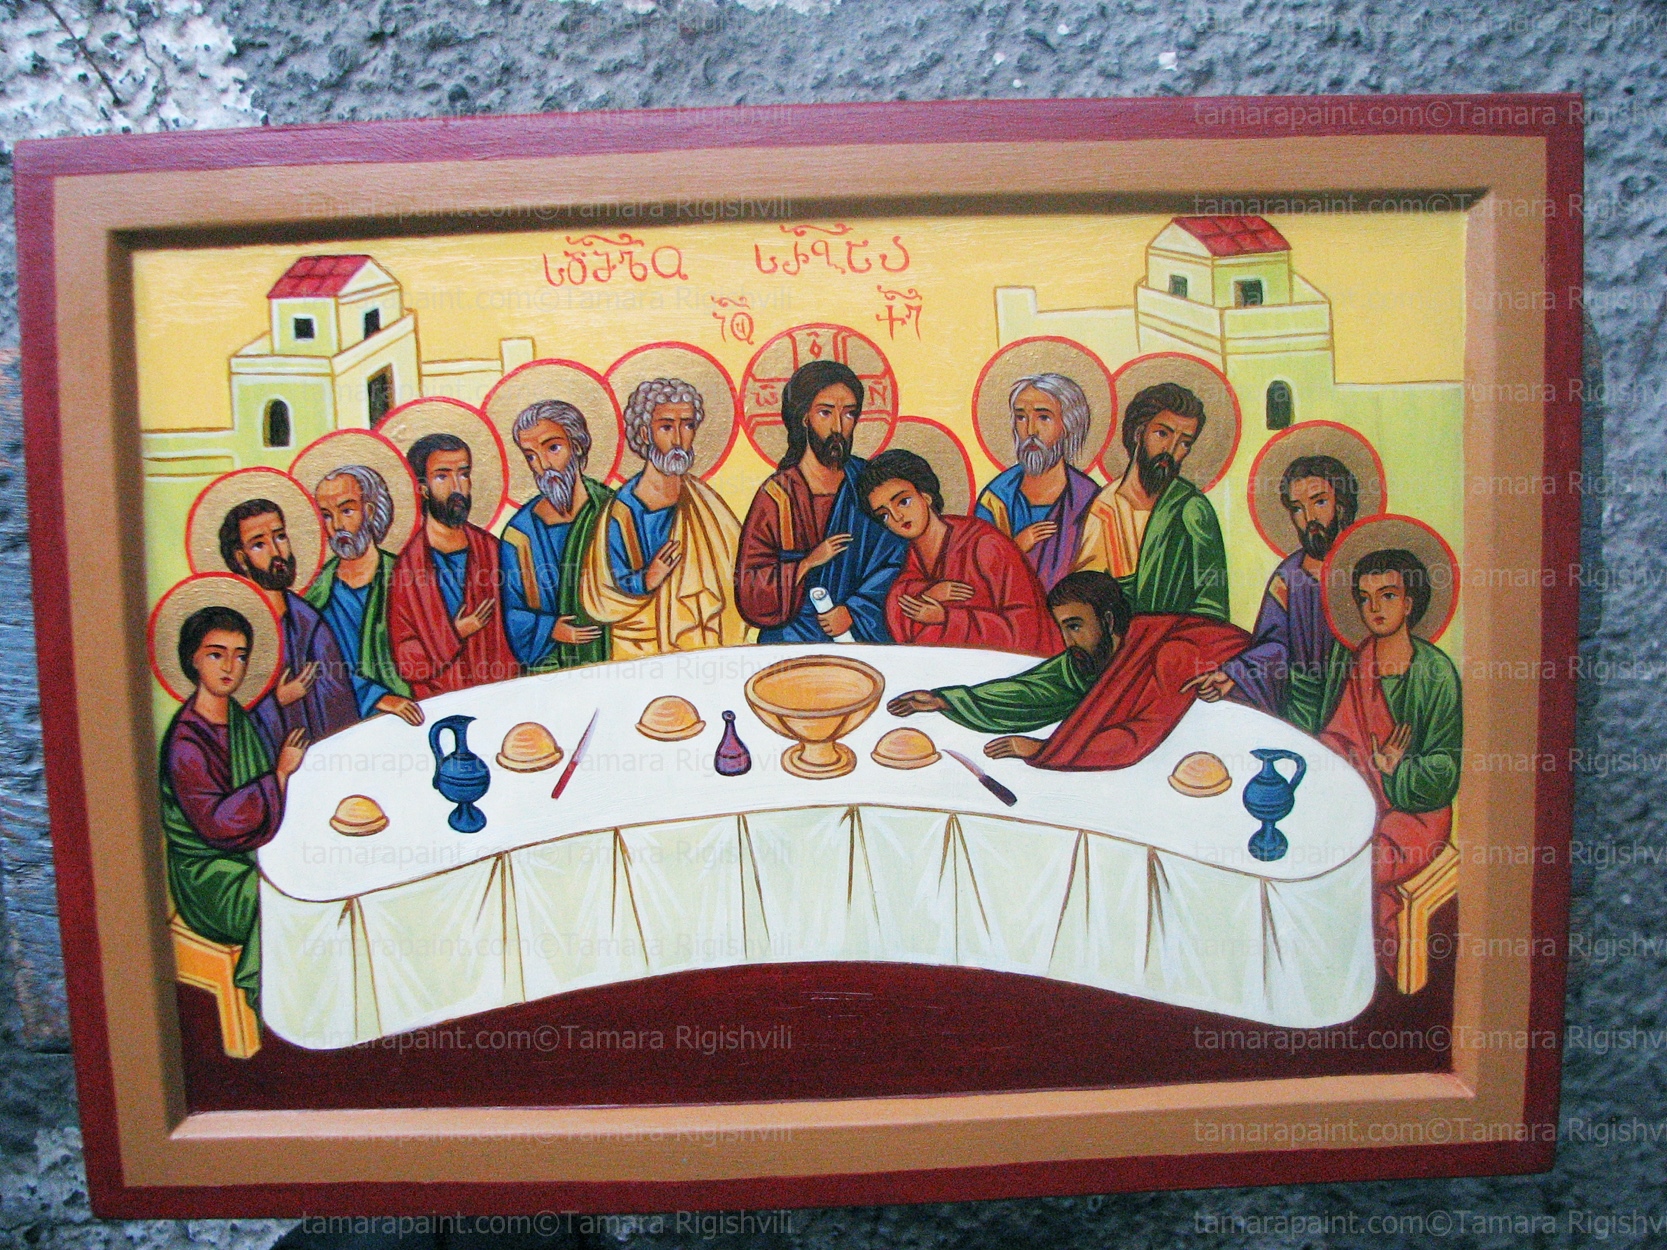 The Last Supper is the final meal that, in the Gospel, Jesus shared with his apostles in Jerusalem before his crucifixion, original icon painting by artist Tamara Rigishvili